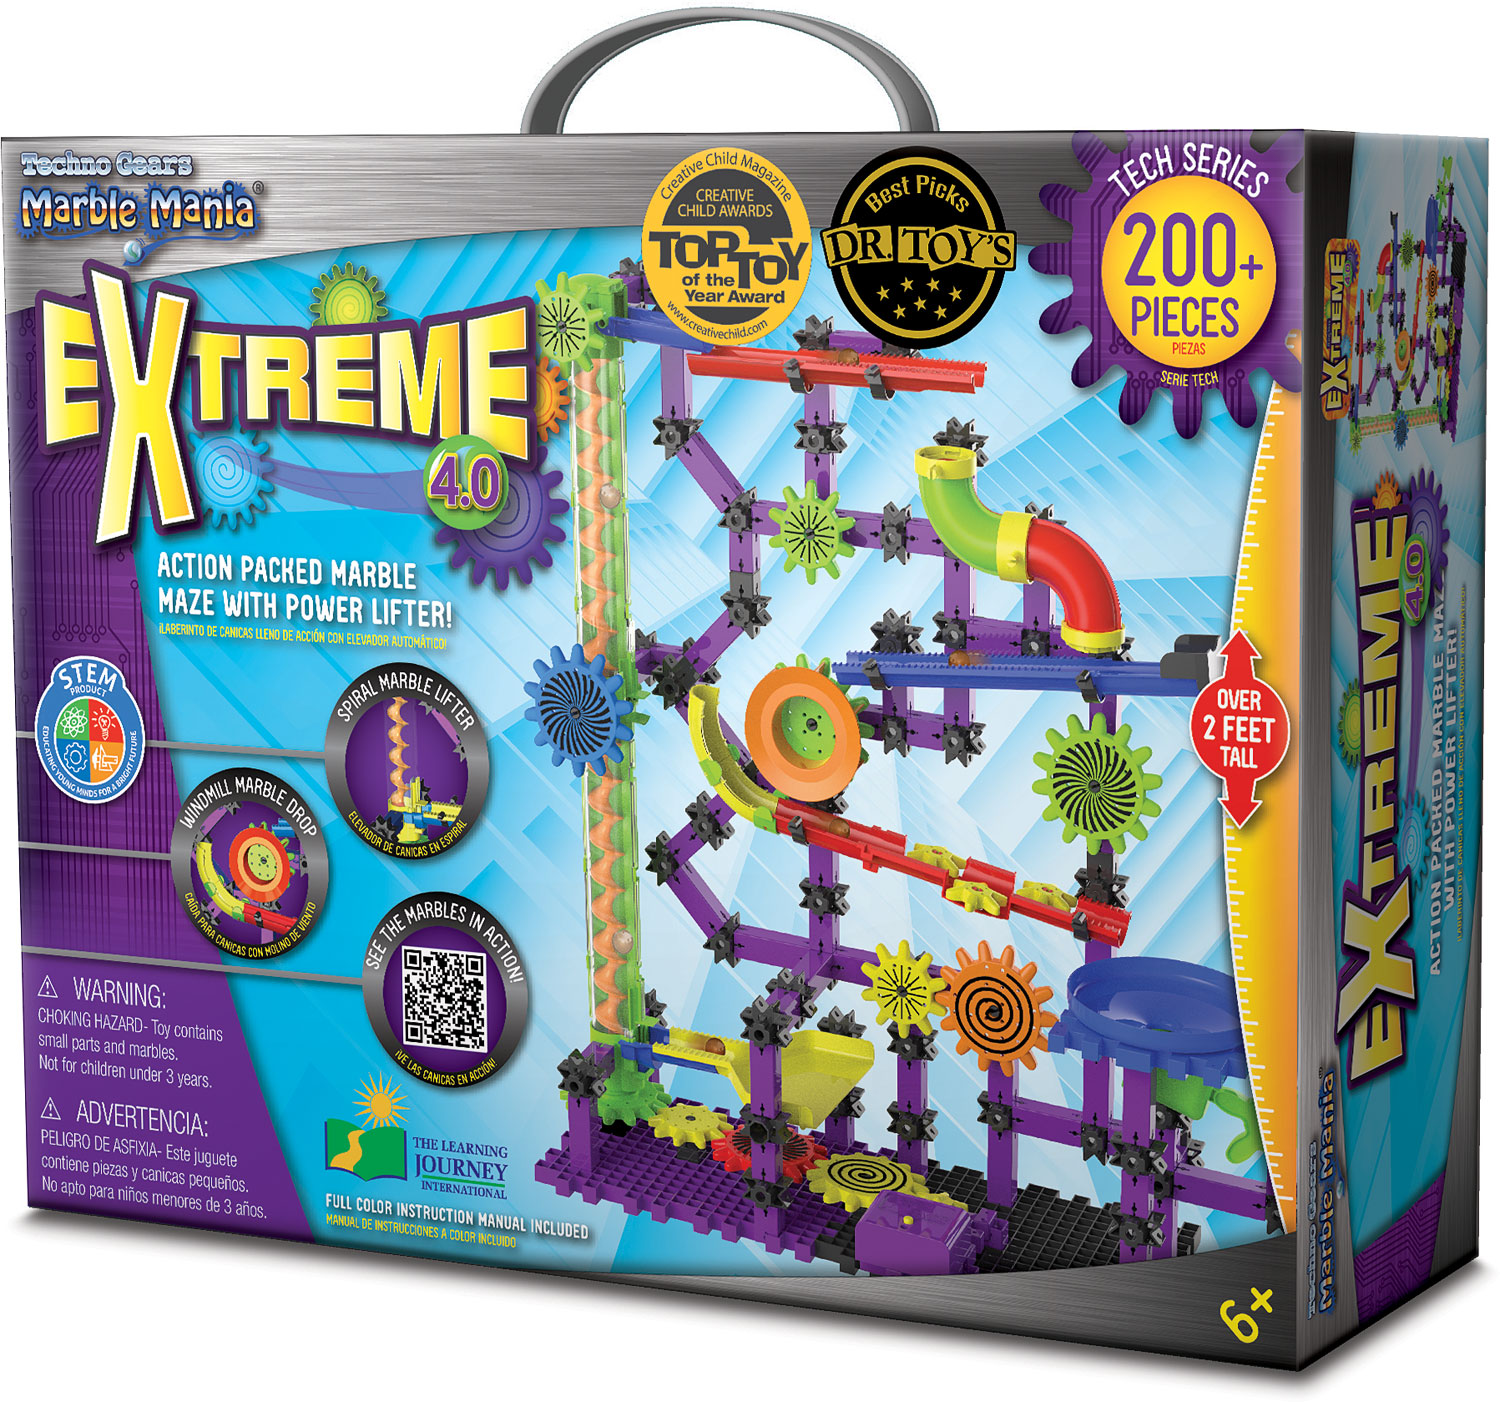 TECHNO GEARS MARBLE MANIA EXTREME 4.0 - Toys 2 Learn